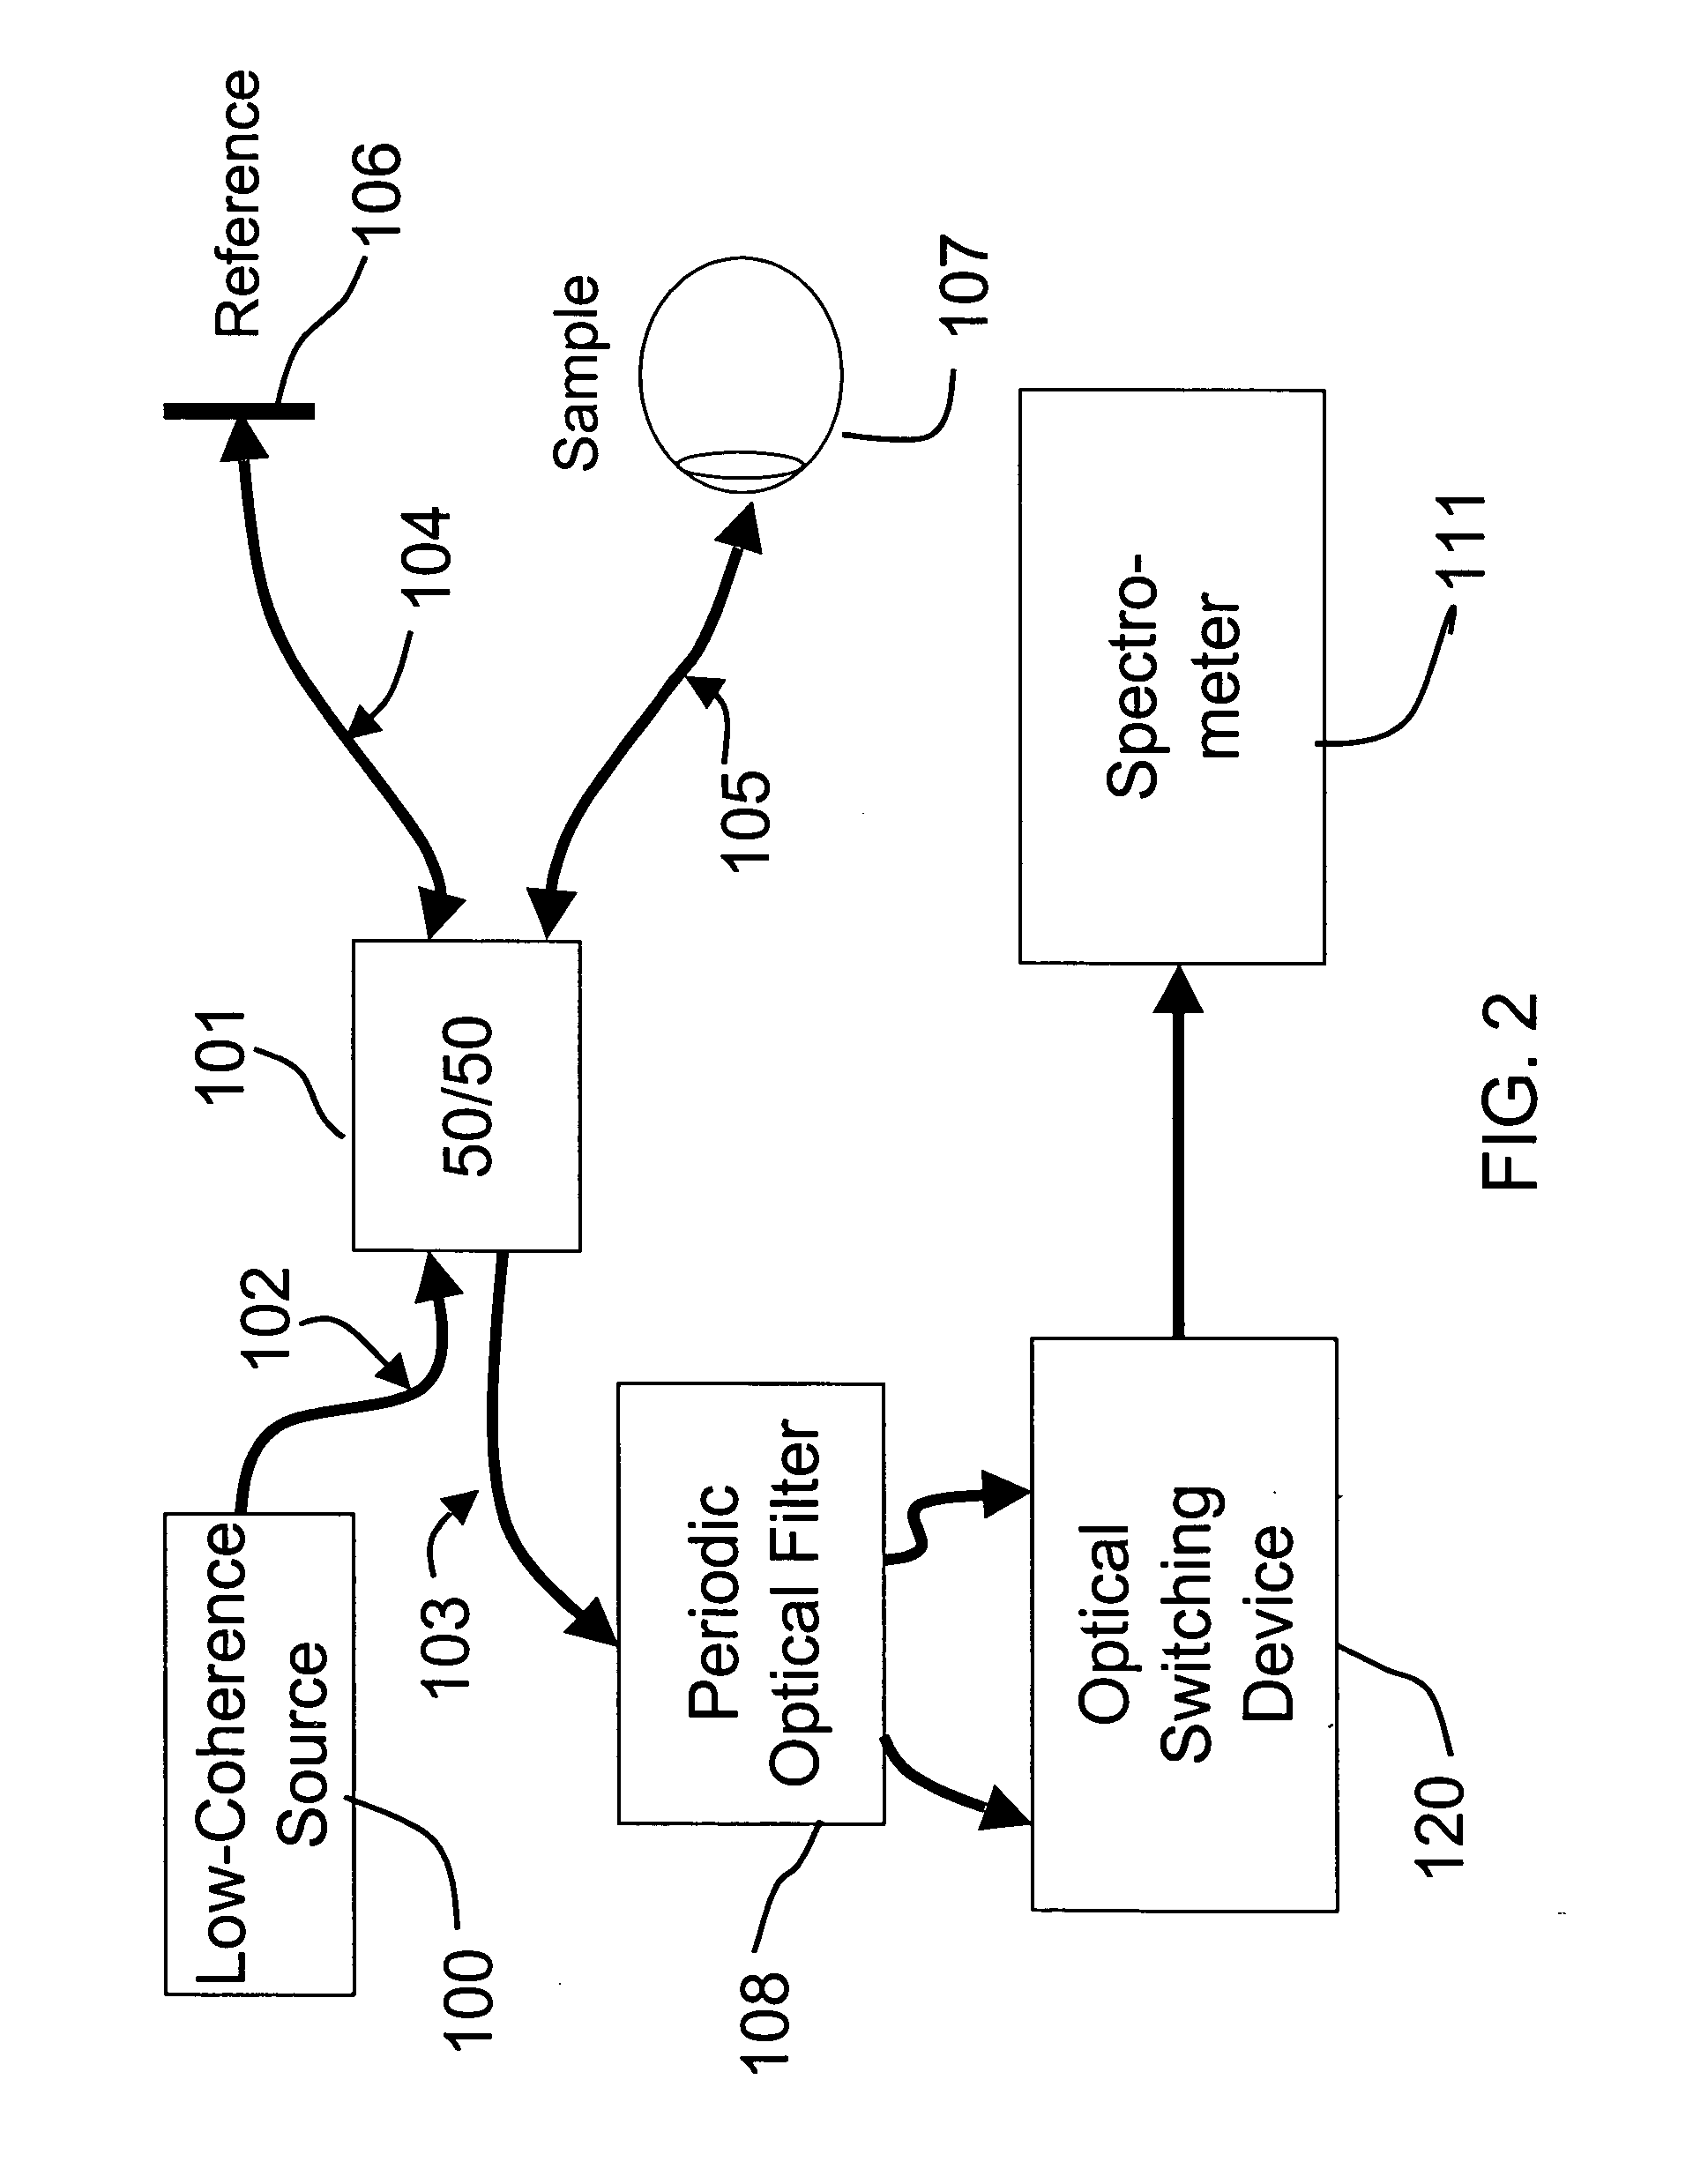 Optical coherence imaging systems having a reduced effective linewidth and methods of using the same